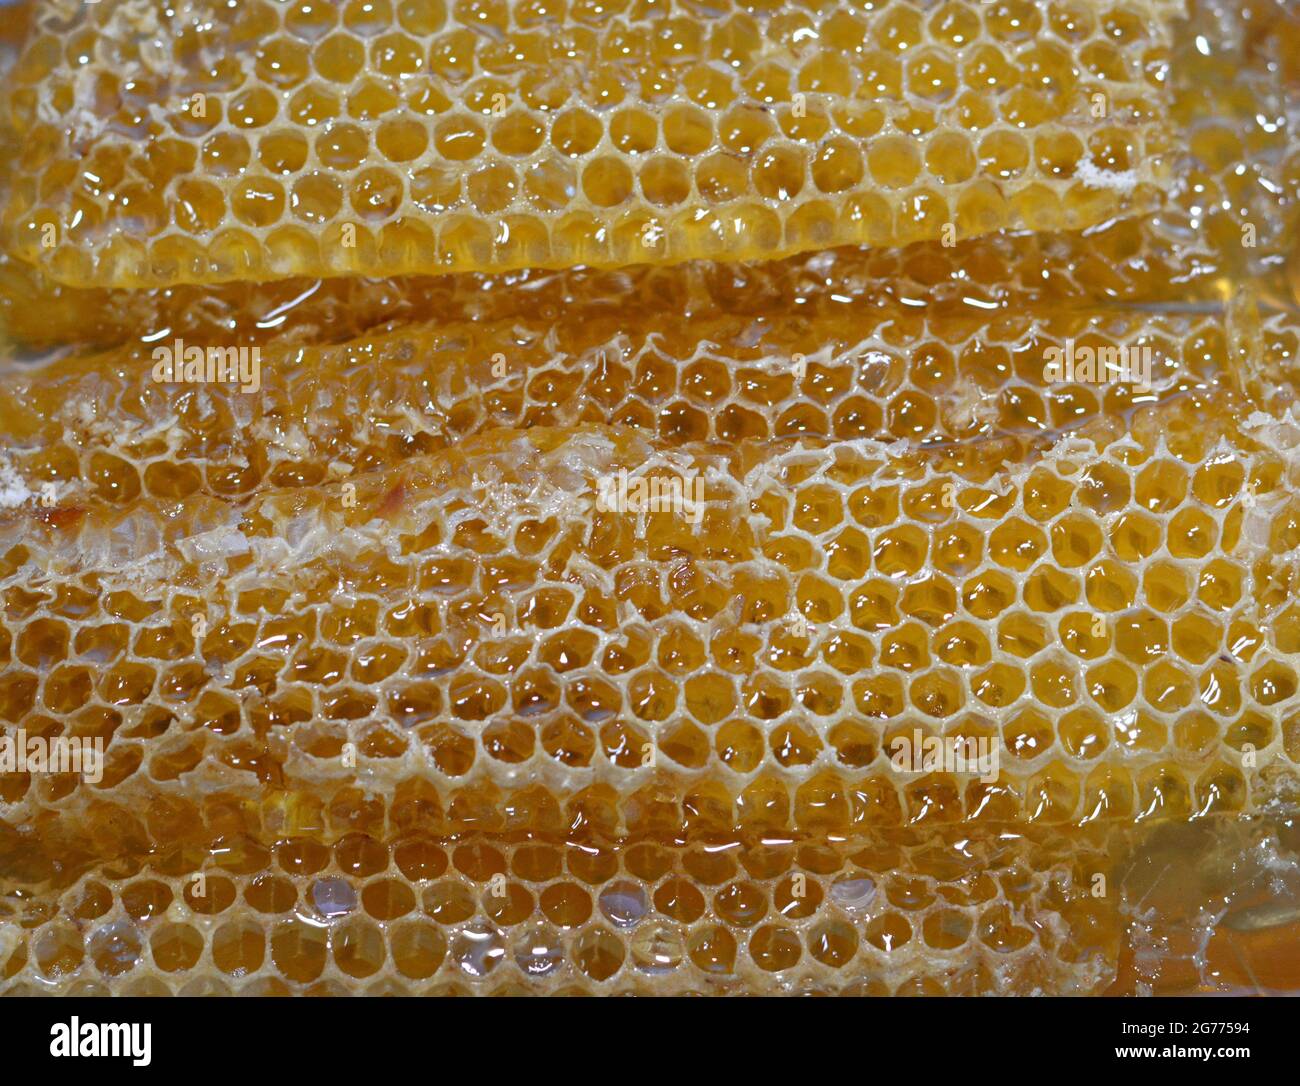 Hexagonal honeycomb cells with honey that hold the queen bee's eggs and store the pollen and honey the worker bees bring to the hive Stock Photo